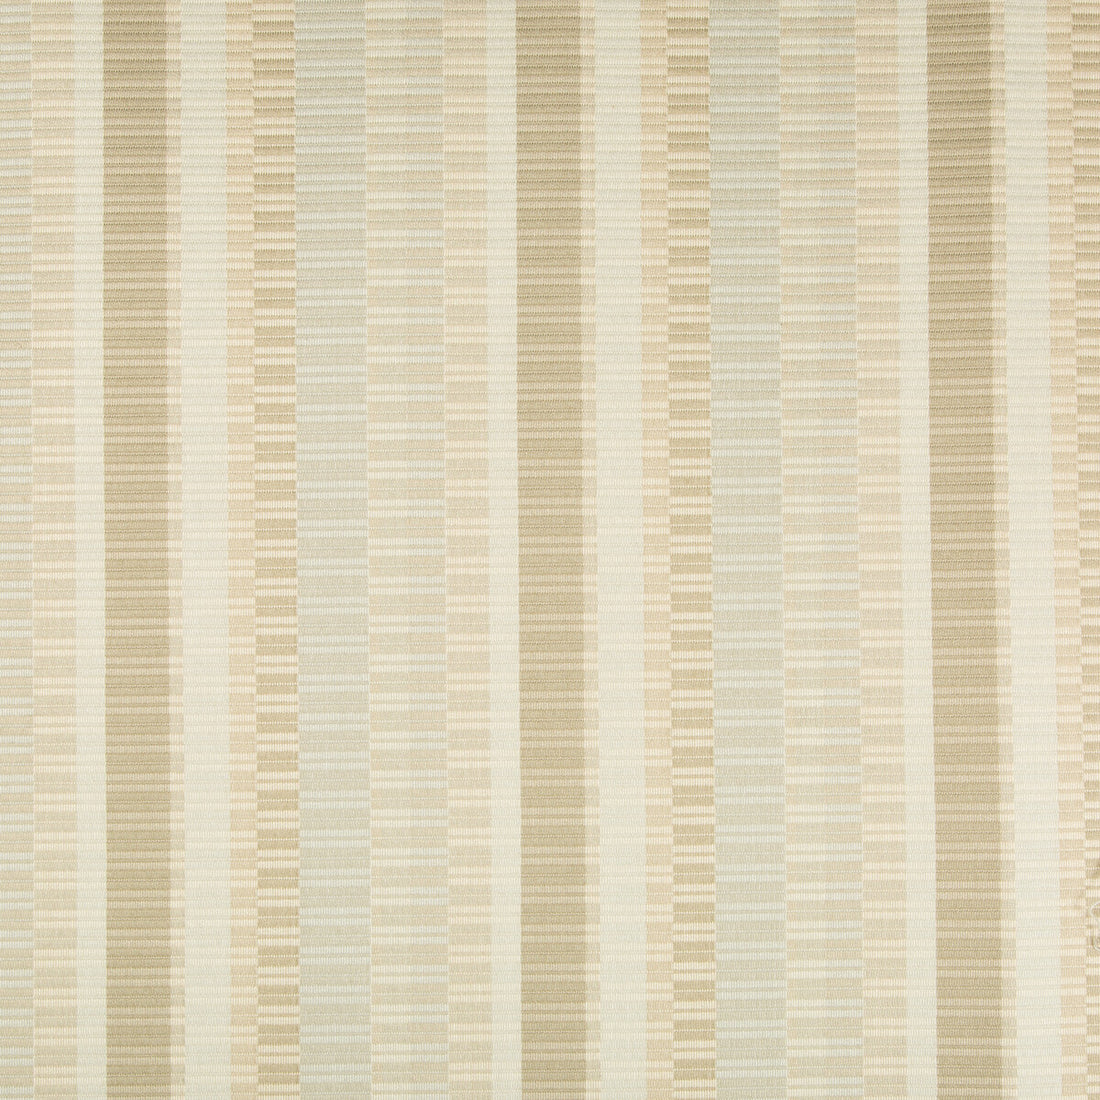 Kravet Design fabric in 35042-16 color - pattern 35042.16.0 - by Kravet Design in the Performance Crypton Home collection